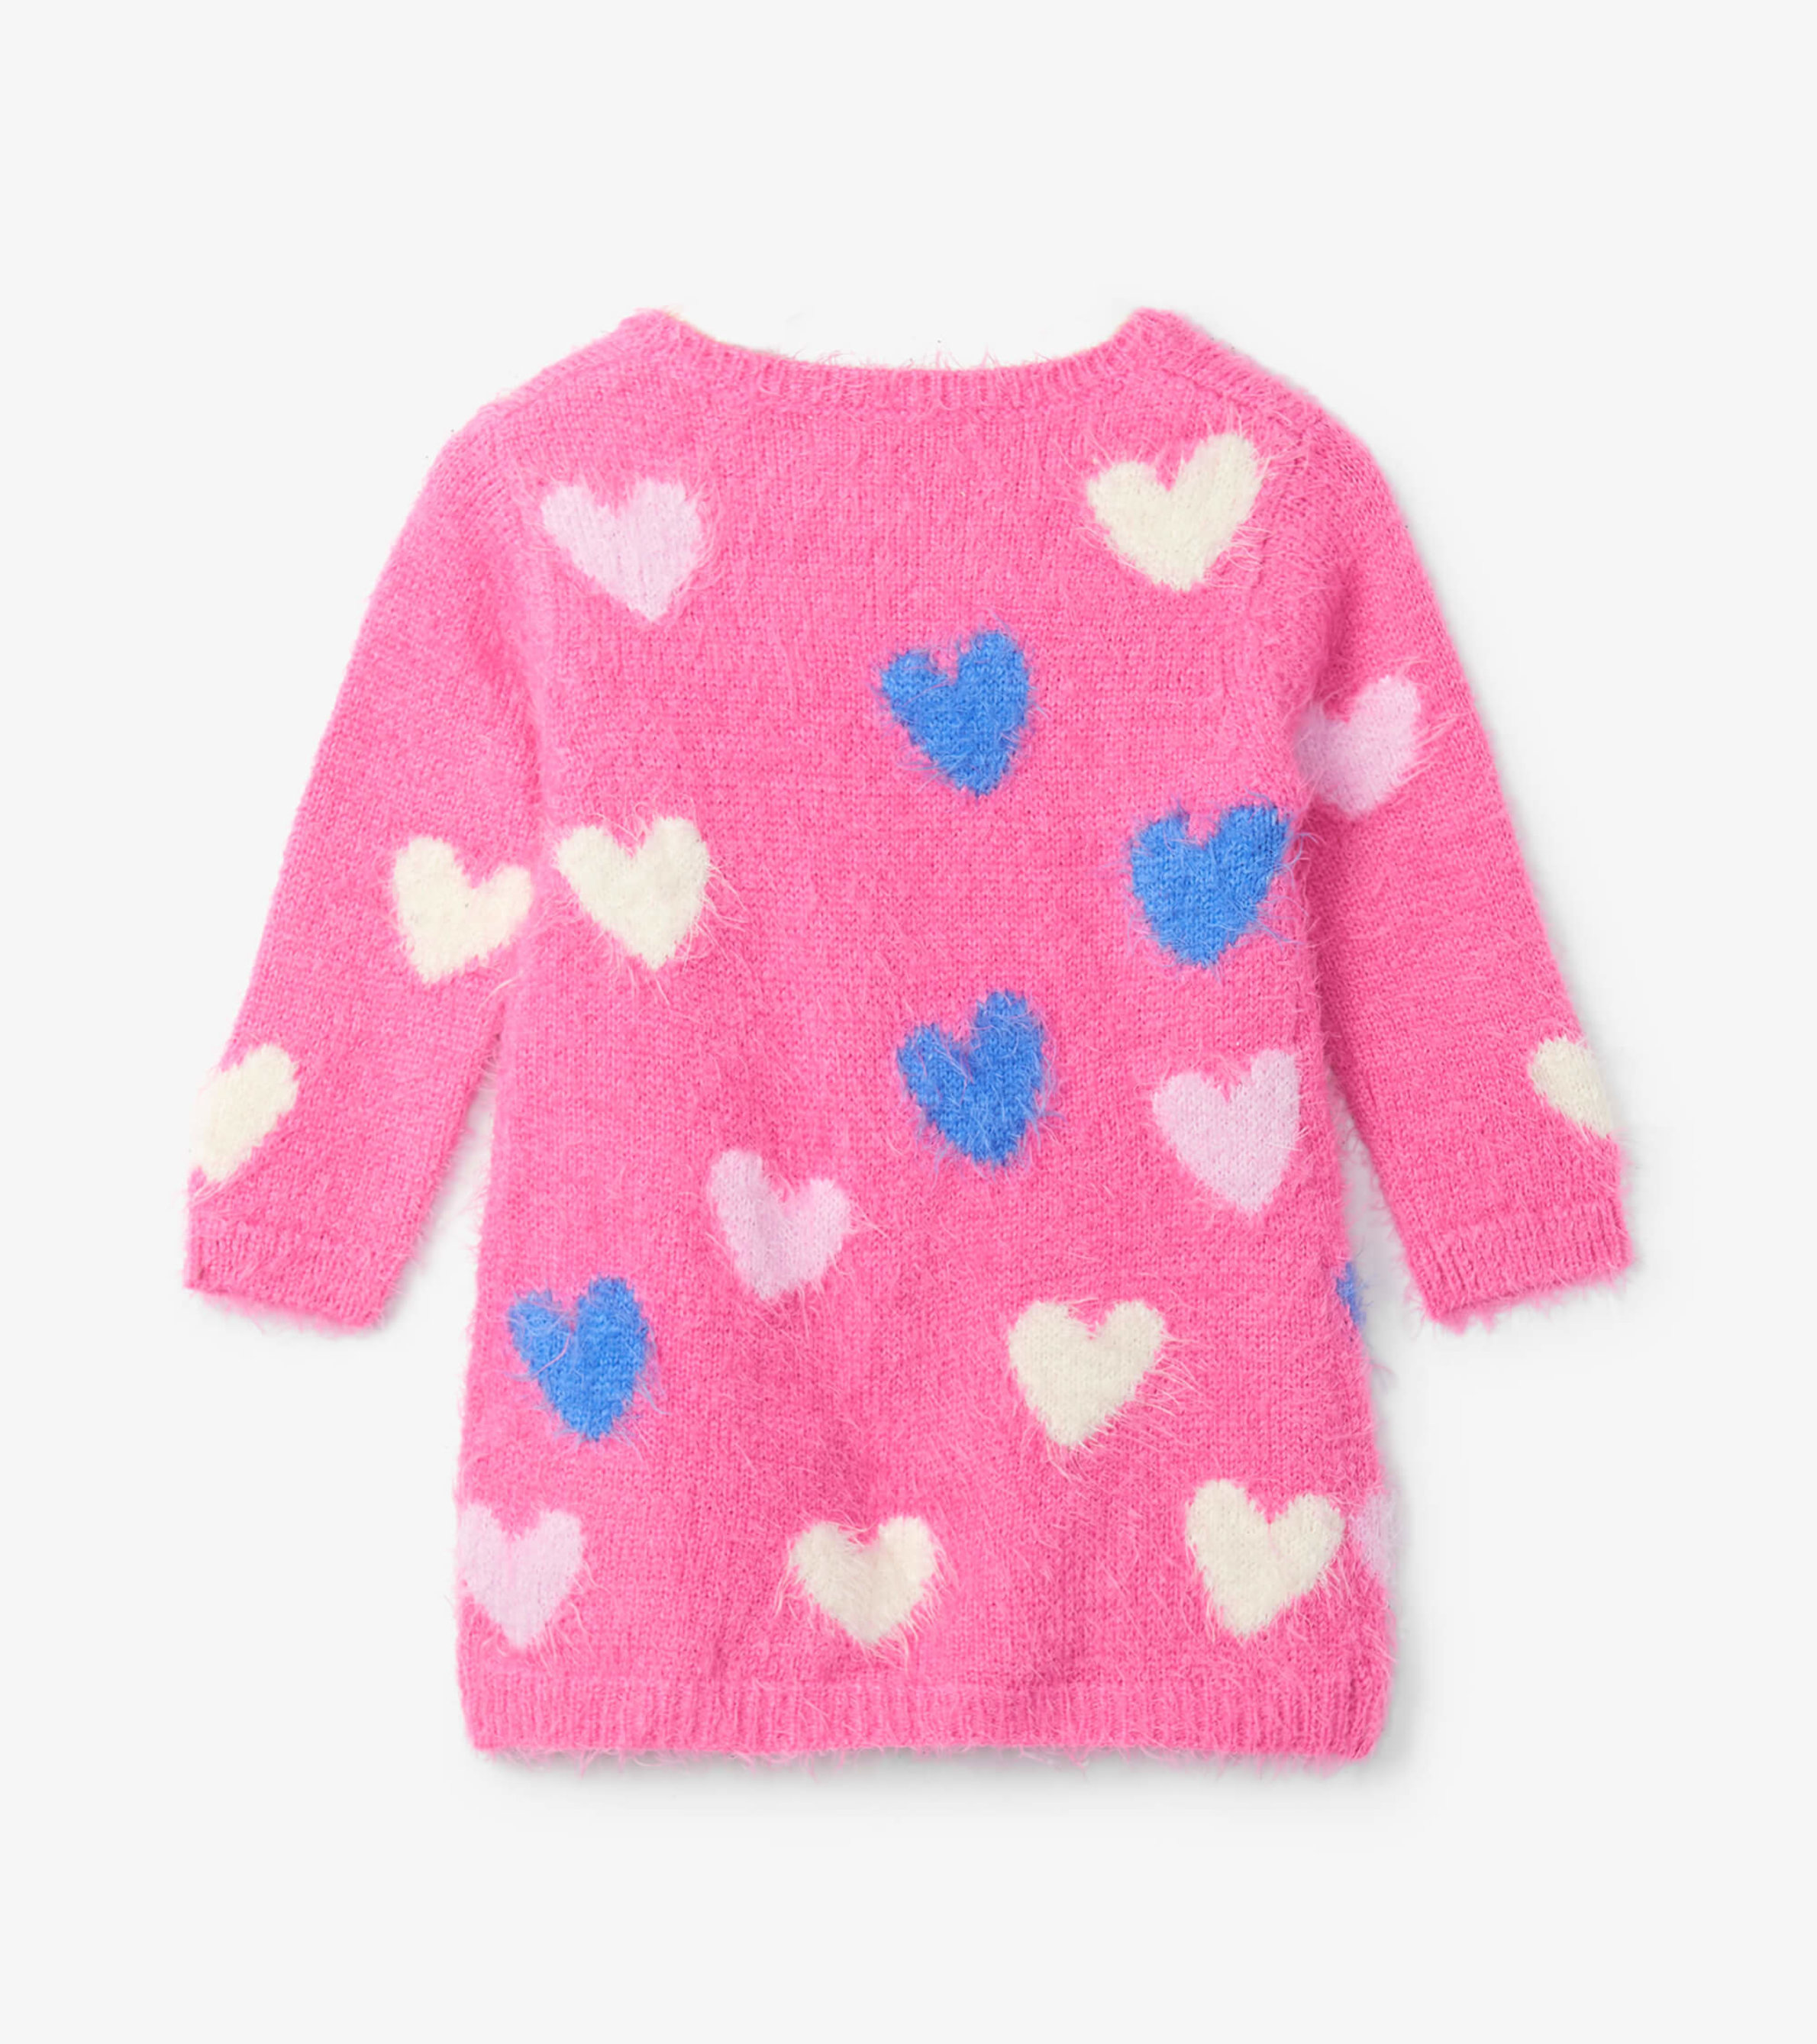 The Heart Confetti Sweater in Hot Pink Large